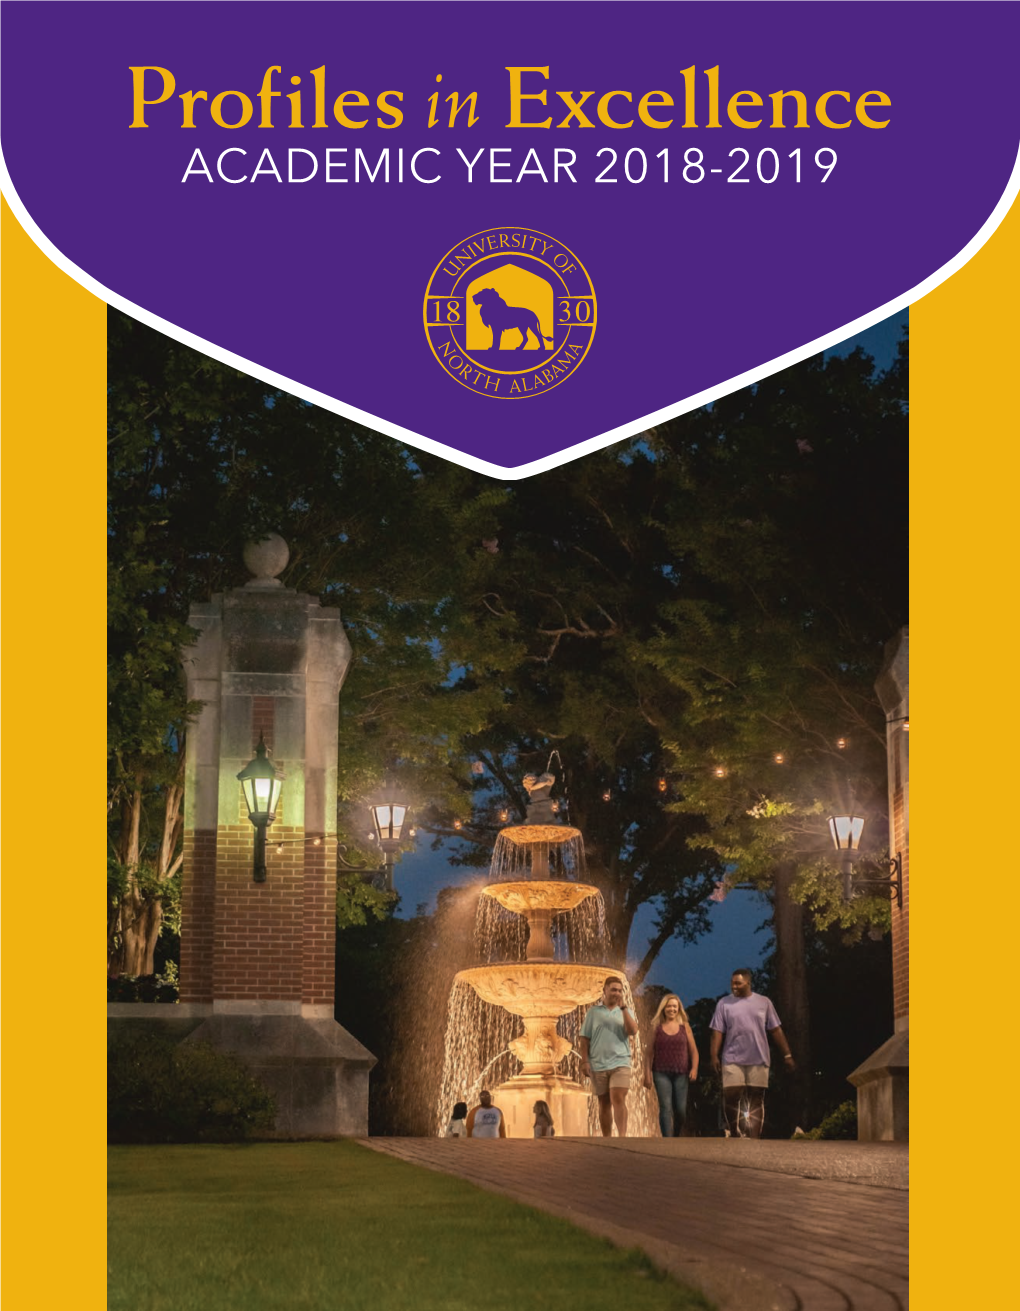 2019 Profiles in Excellence • Page 1 Academic Affairs • OUTSTANDING ADVISING AWA R D